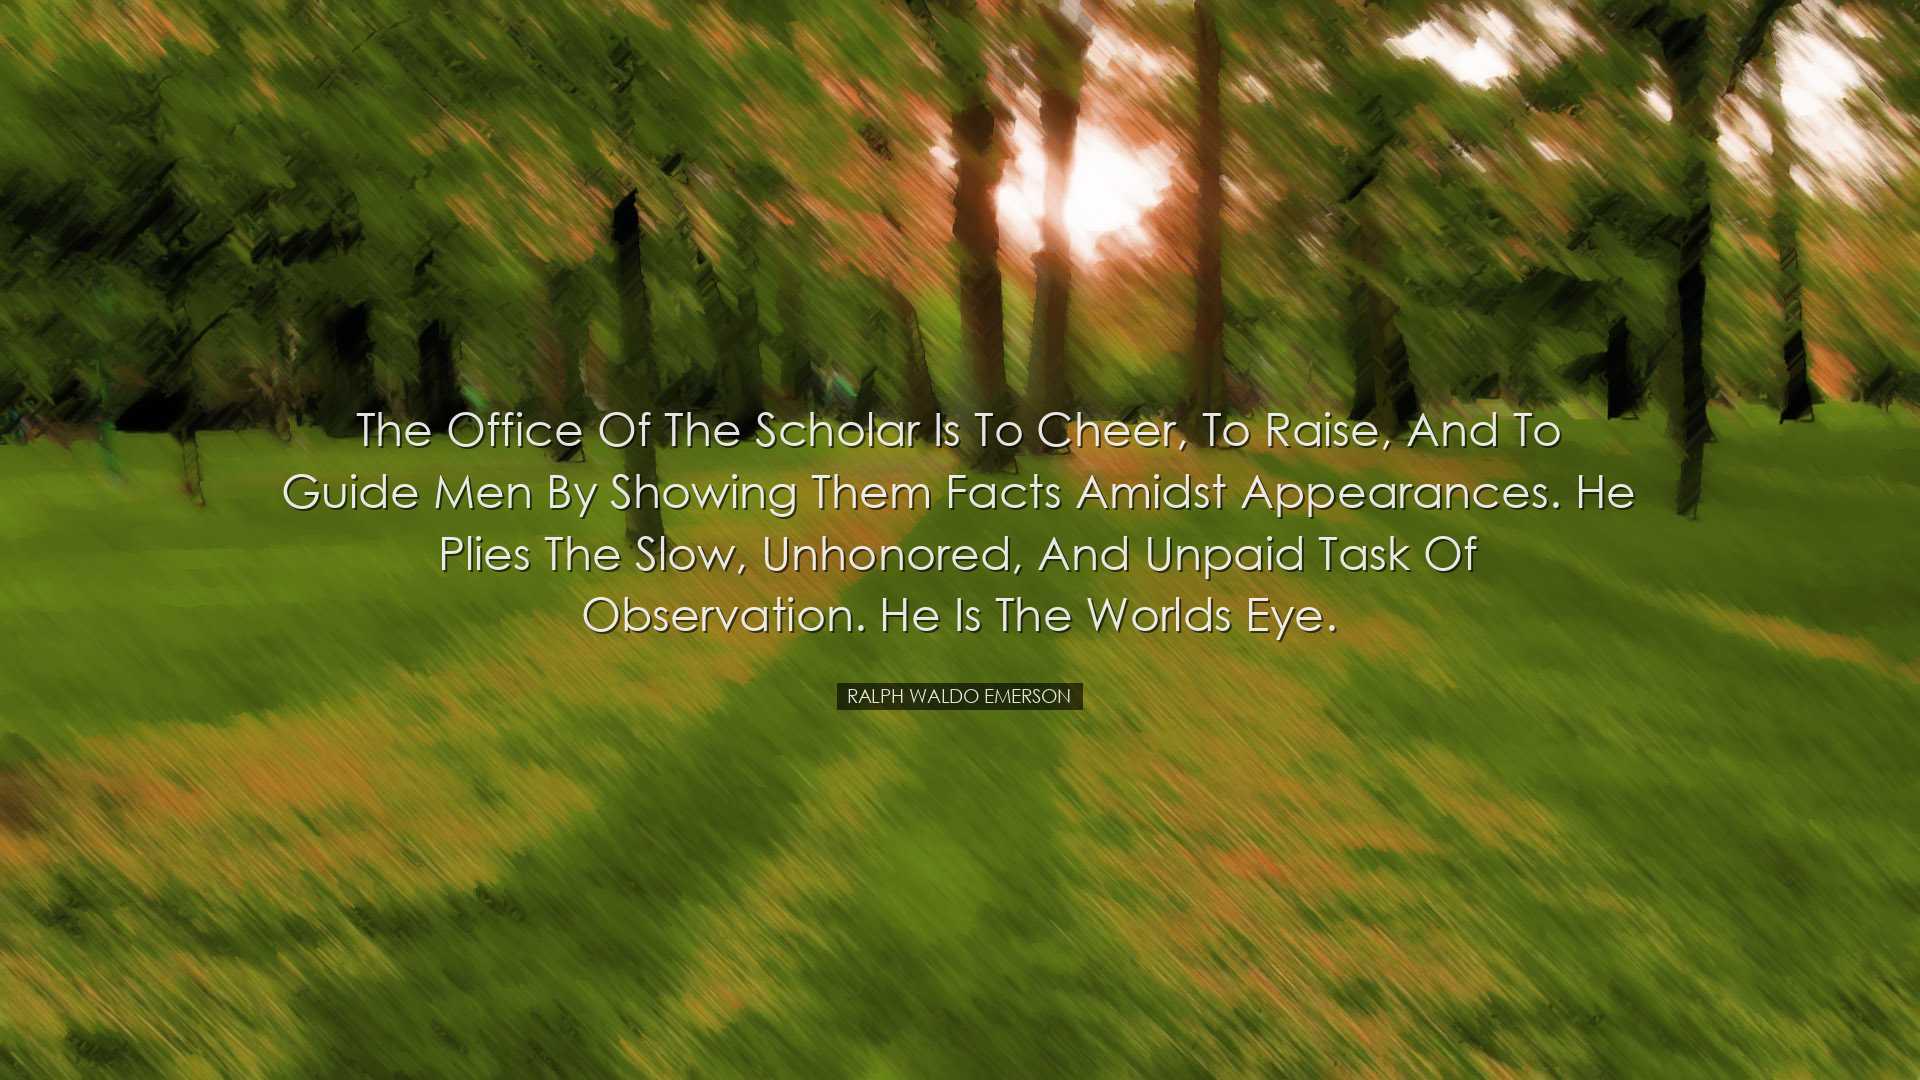 The office of the scholar is to cheer, to raise, and to guide men